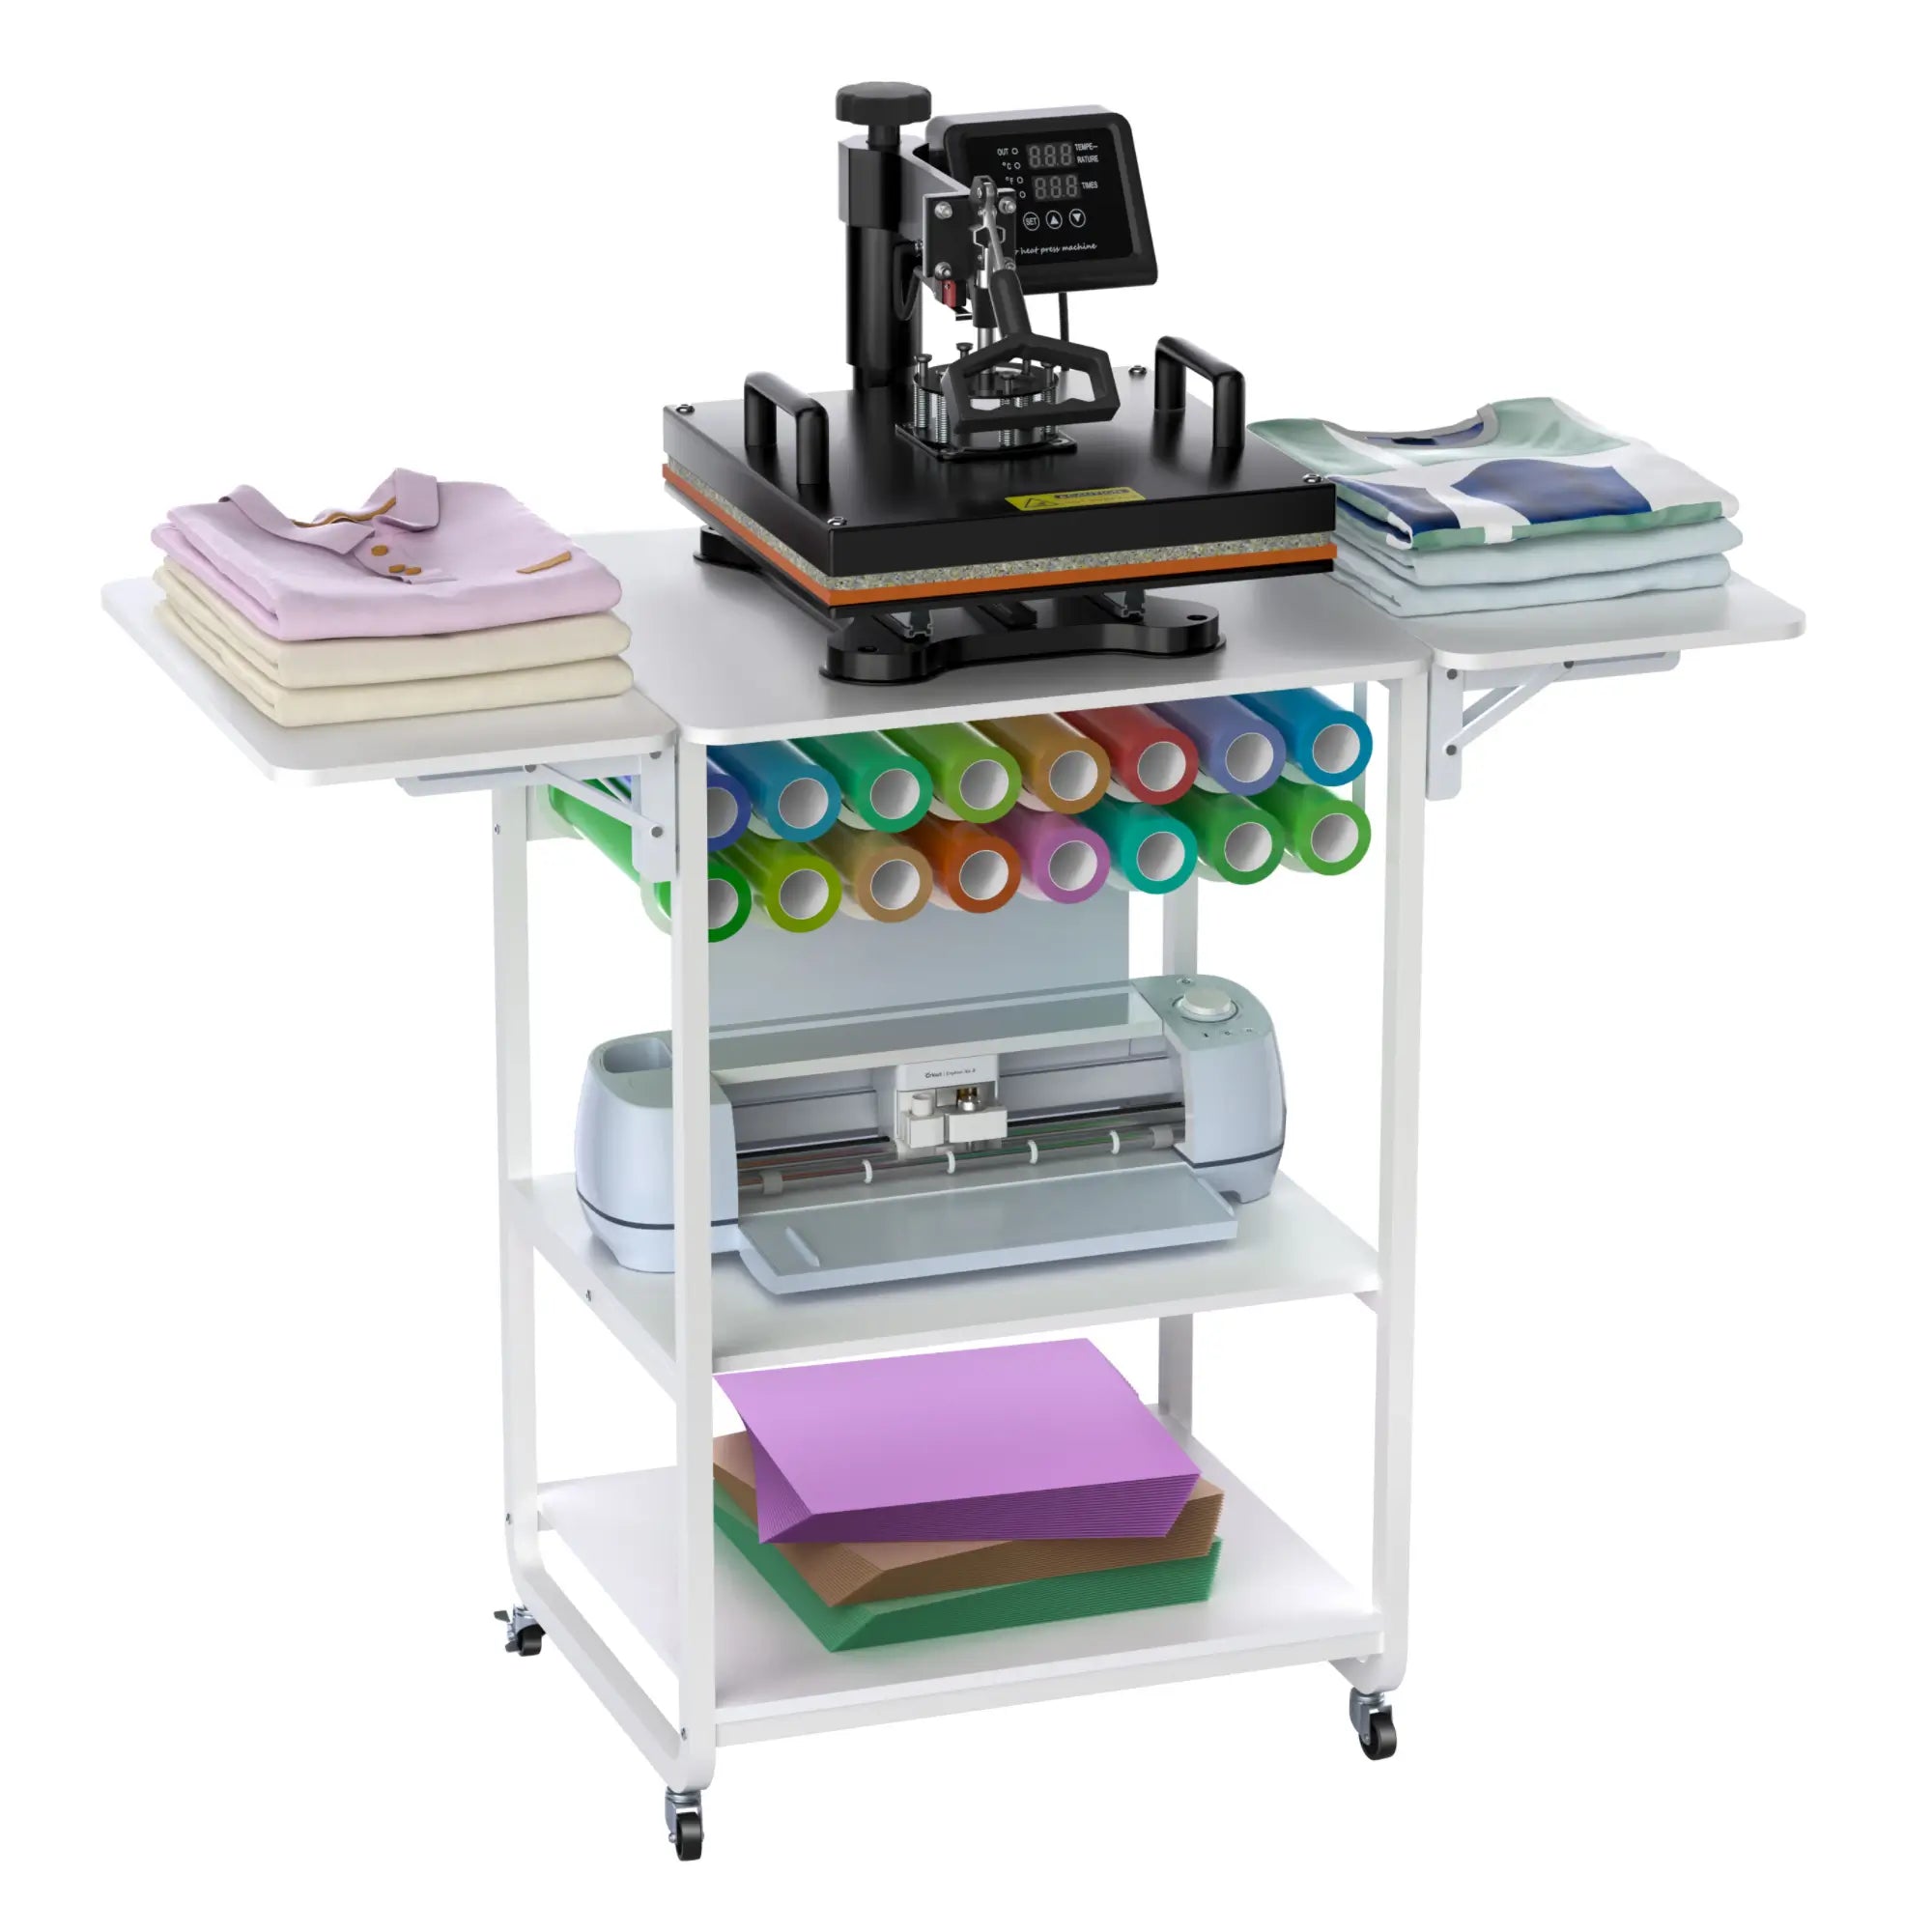 Crafit 3-Tier Rolling Craft Storage Workbench with Foldable Sides for Heat Press white